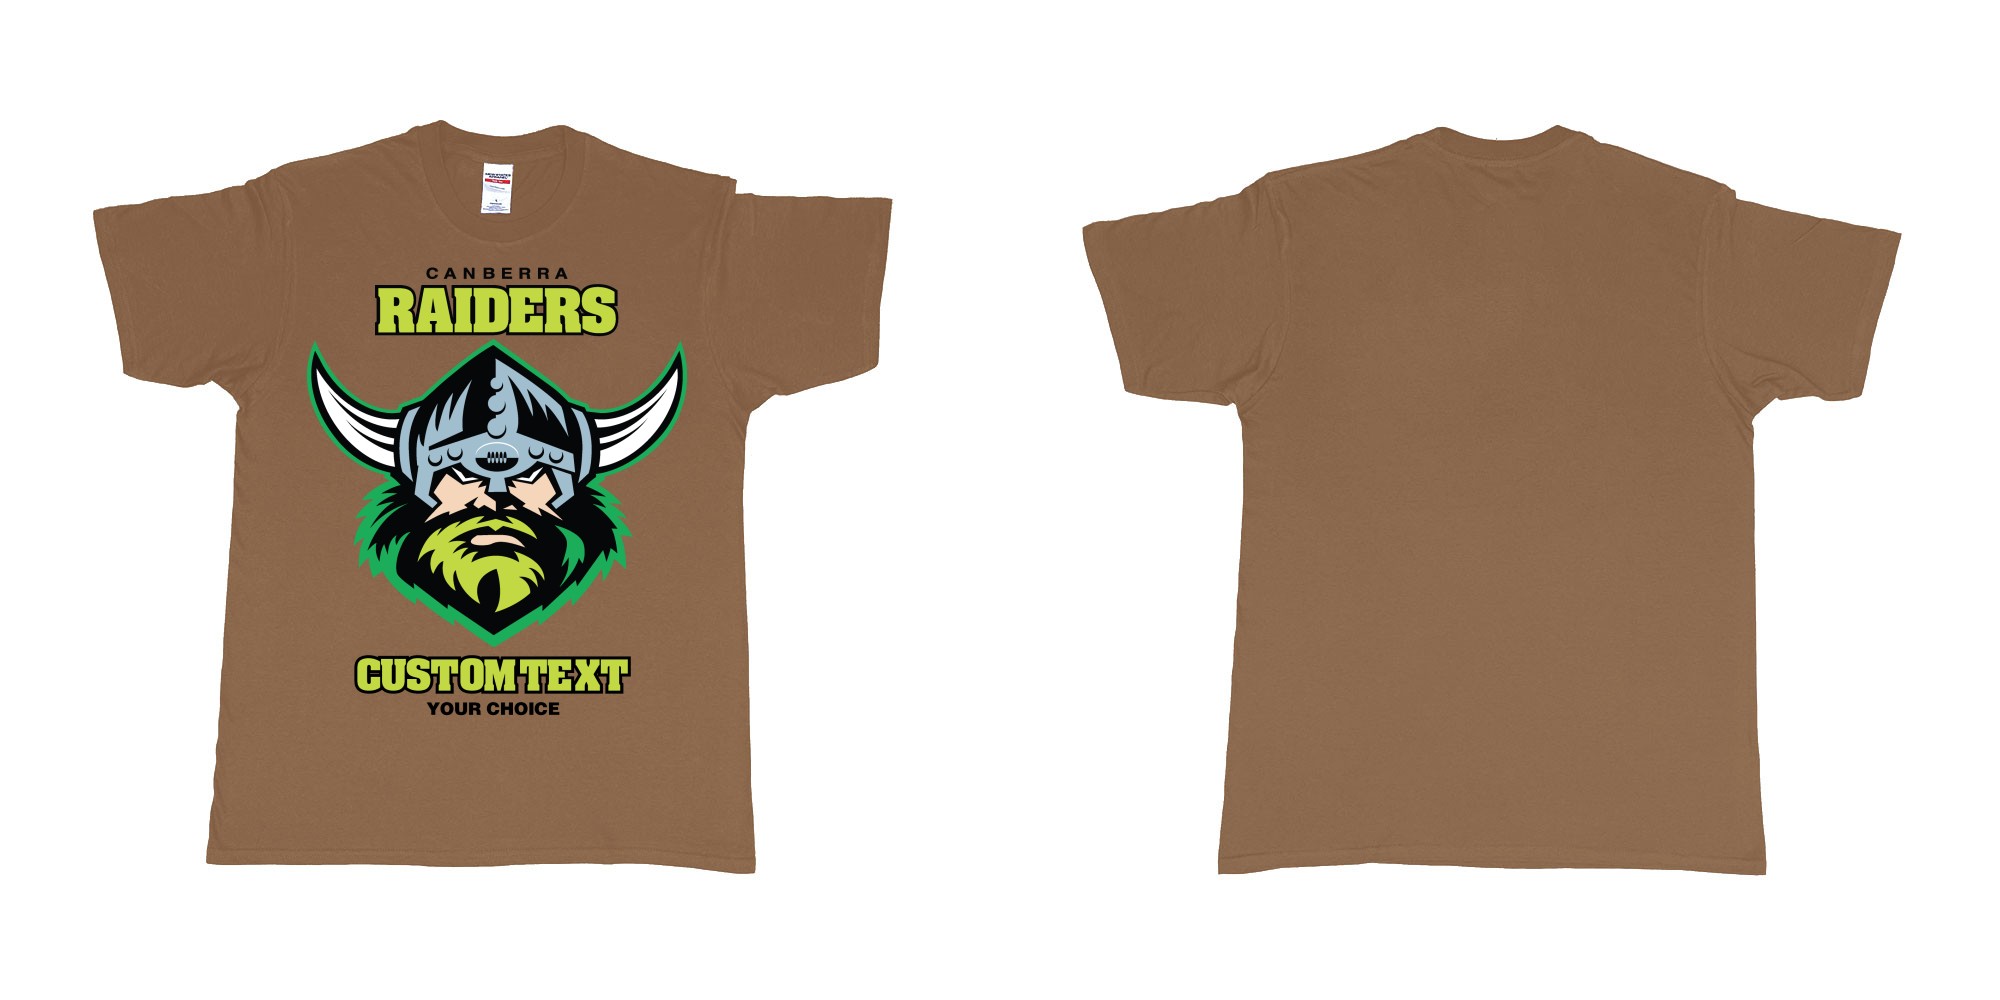 Custom tshirt design canberra raiders nrl logo own printed text near you in fabric color chestnut choice your own text made in Bali by The Pirate Way